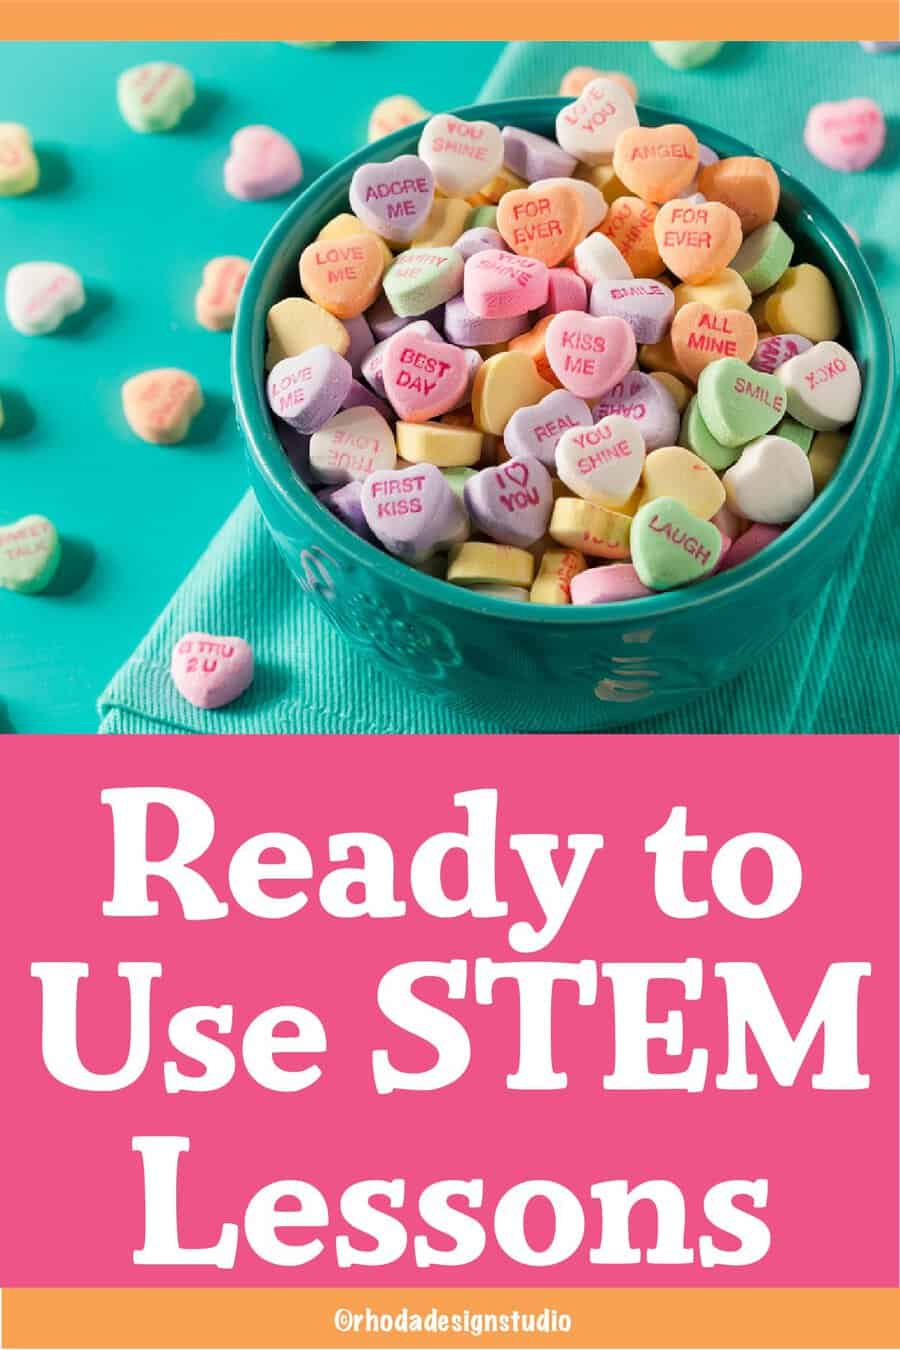 A collection of Valentines Day Crafts for science lessons. Use these lesson plans for science, math, engineering, or technology lessons during February. Your kids will be so excited.